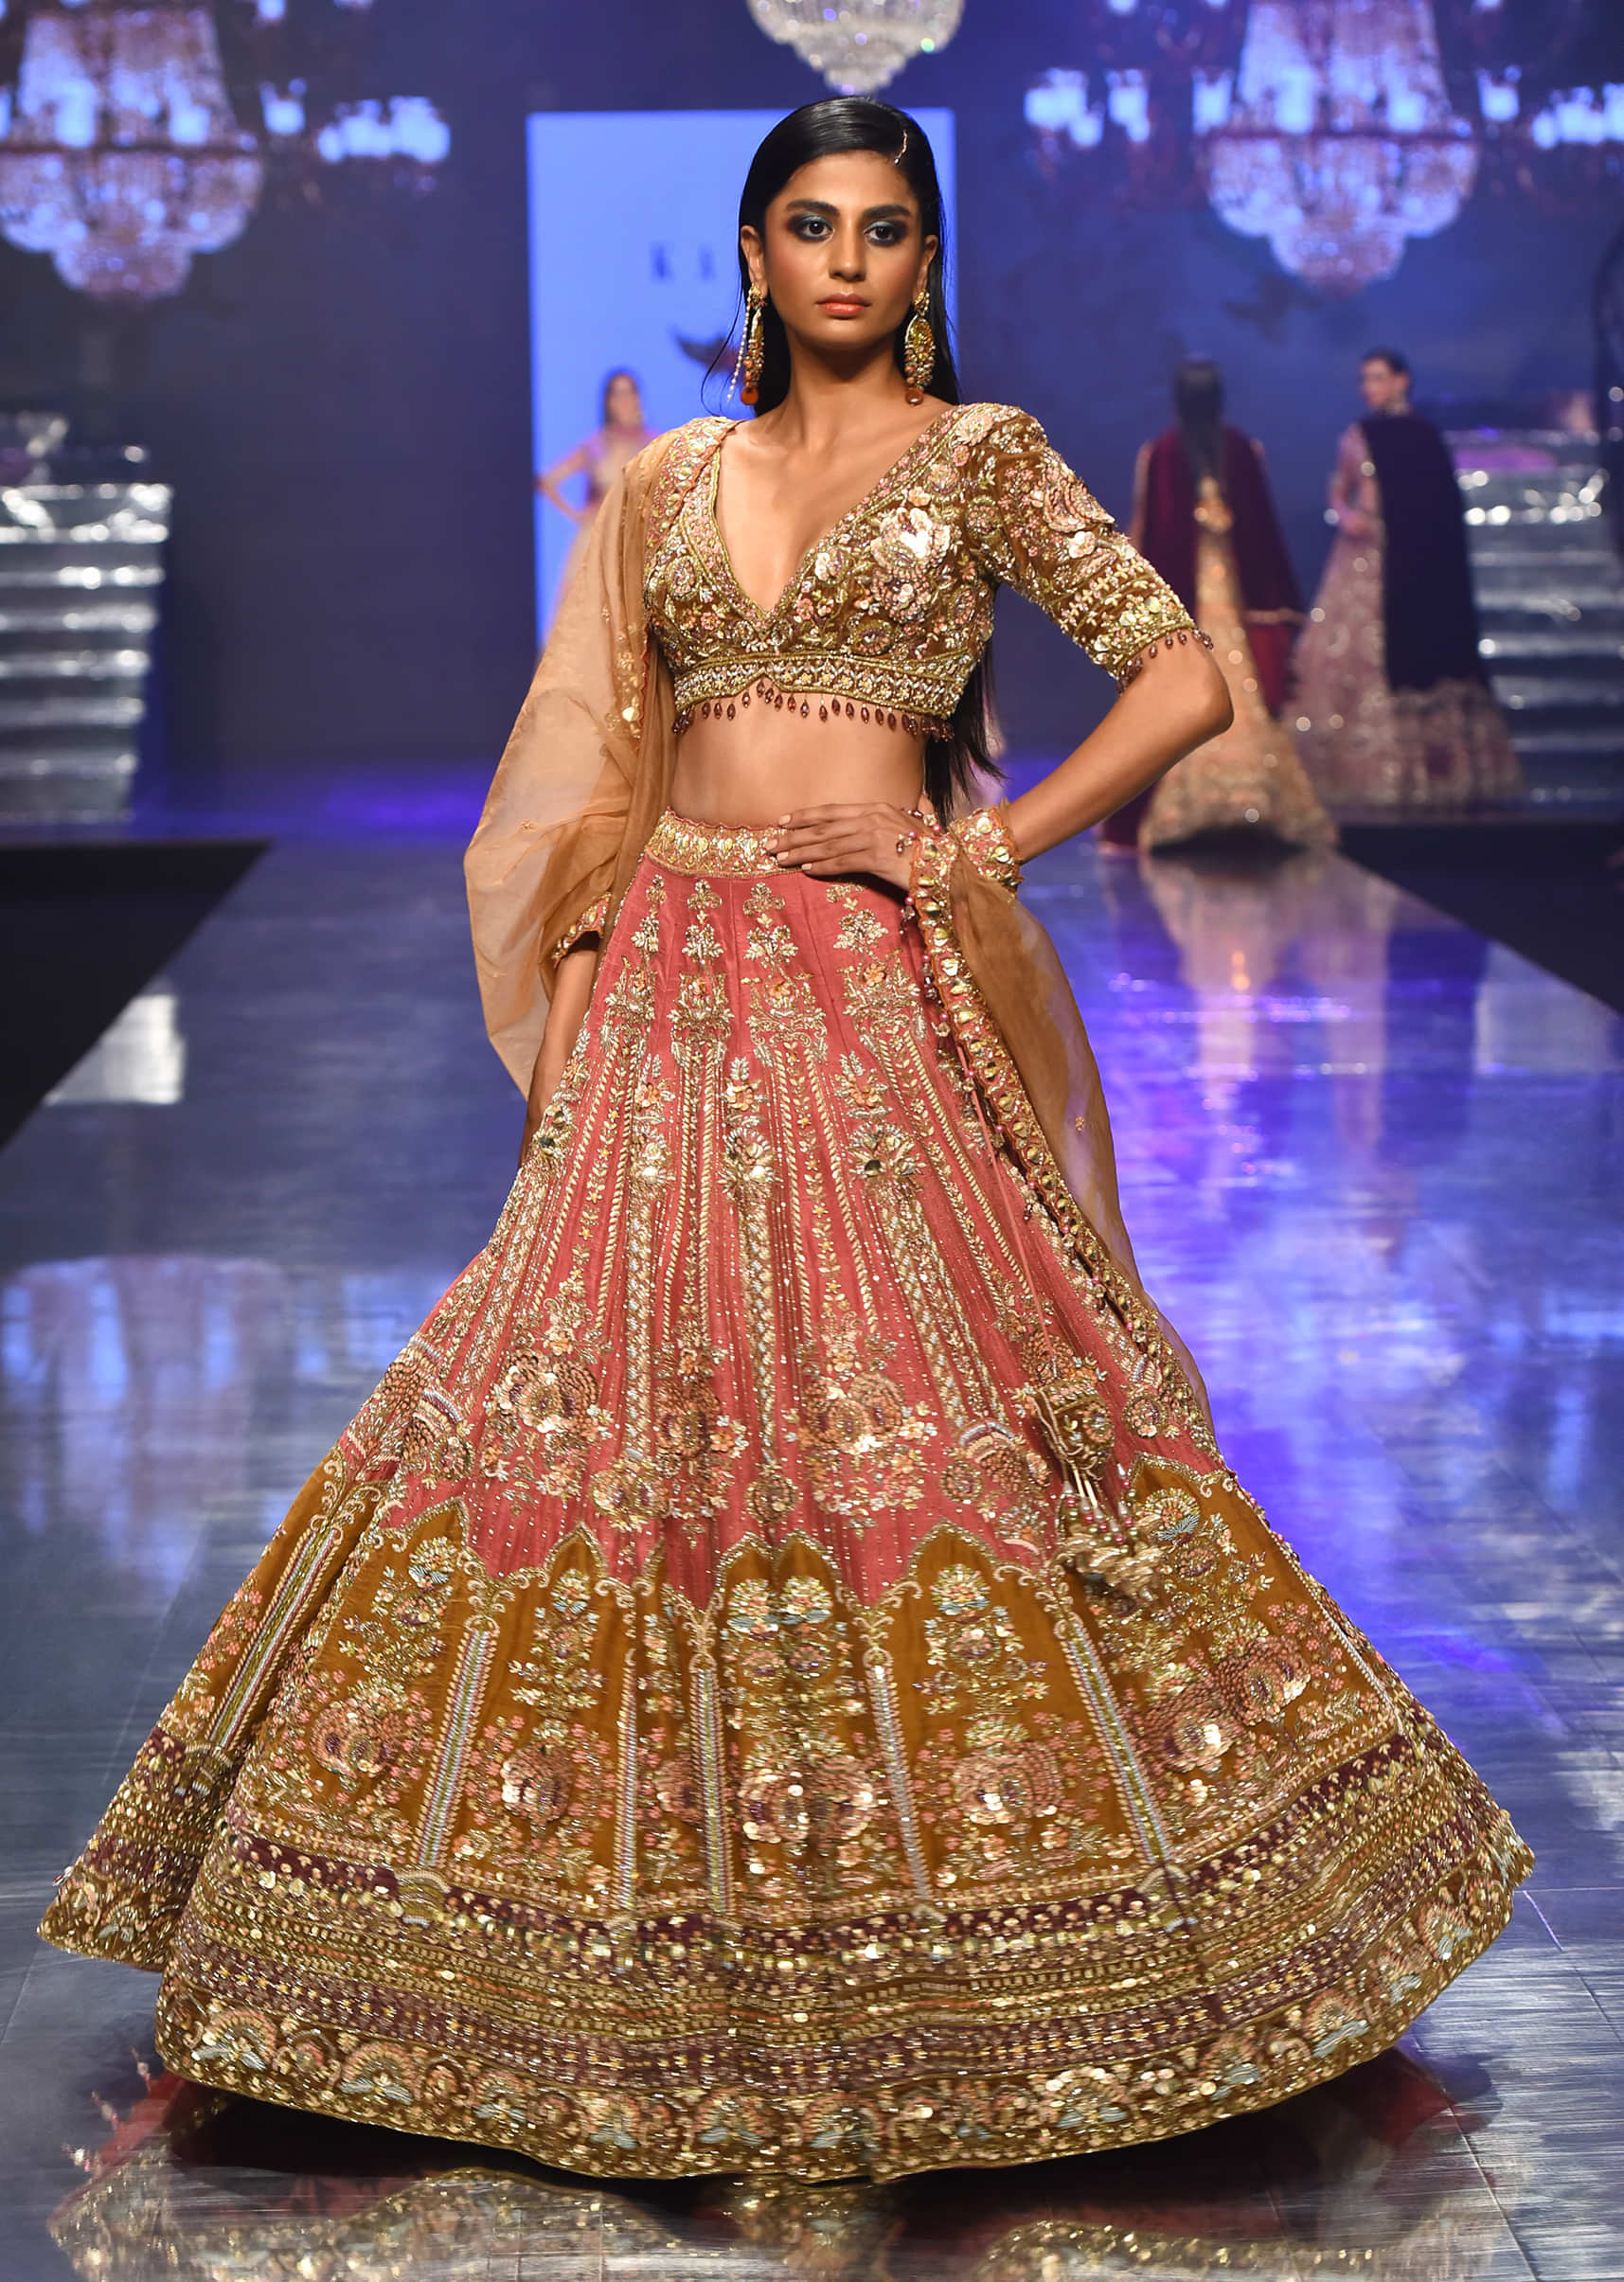 Pin on wedding lehengas for the bride